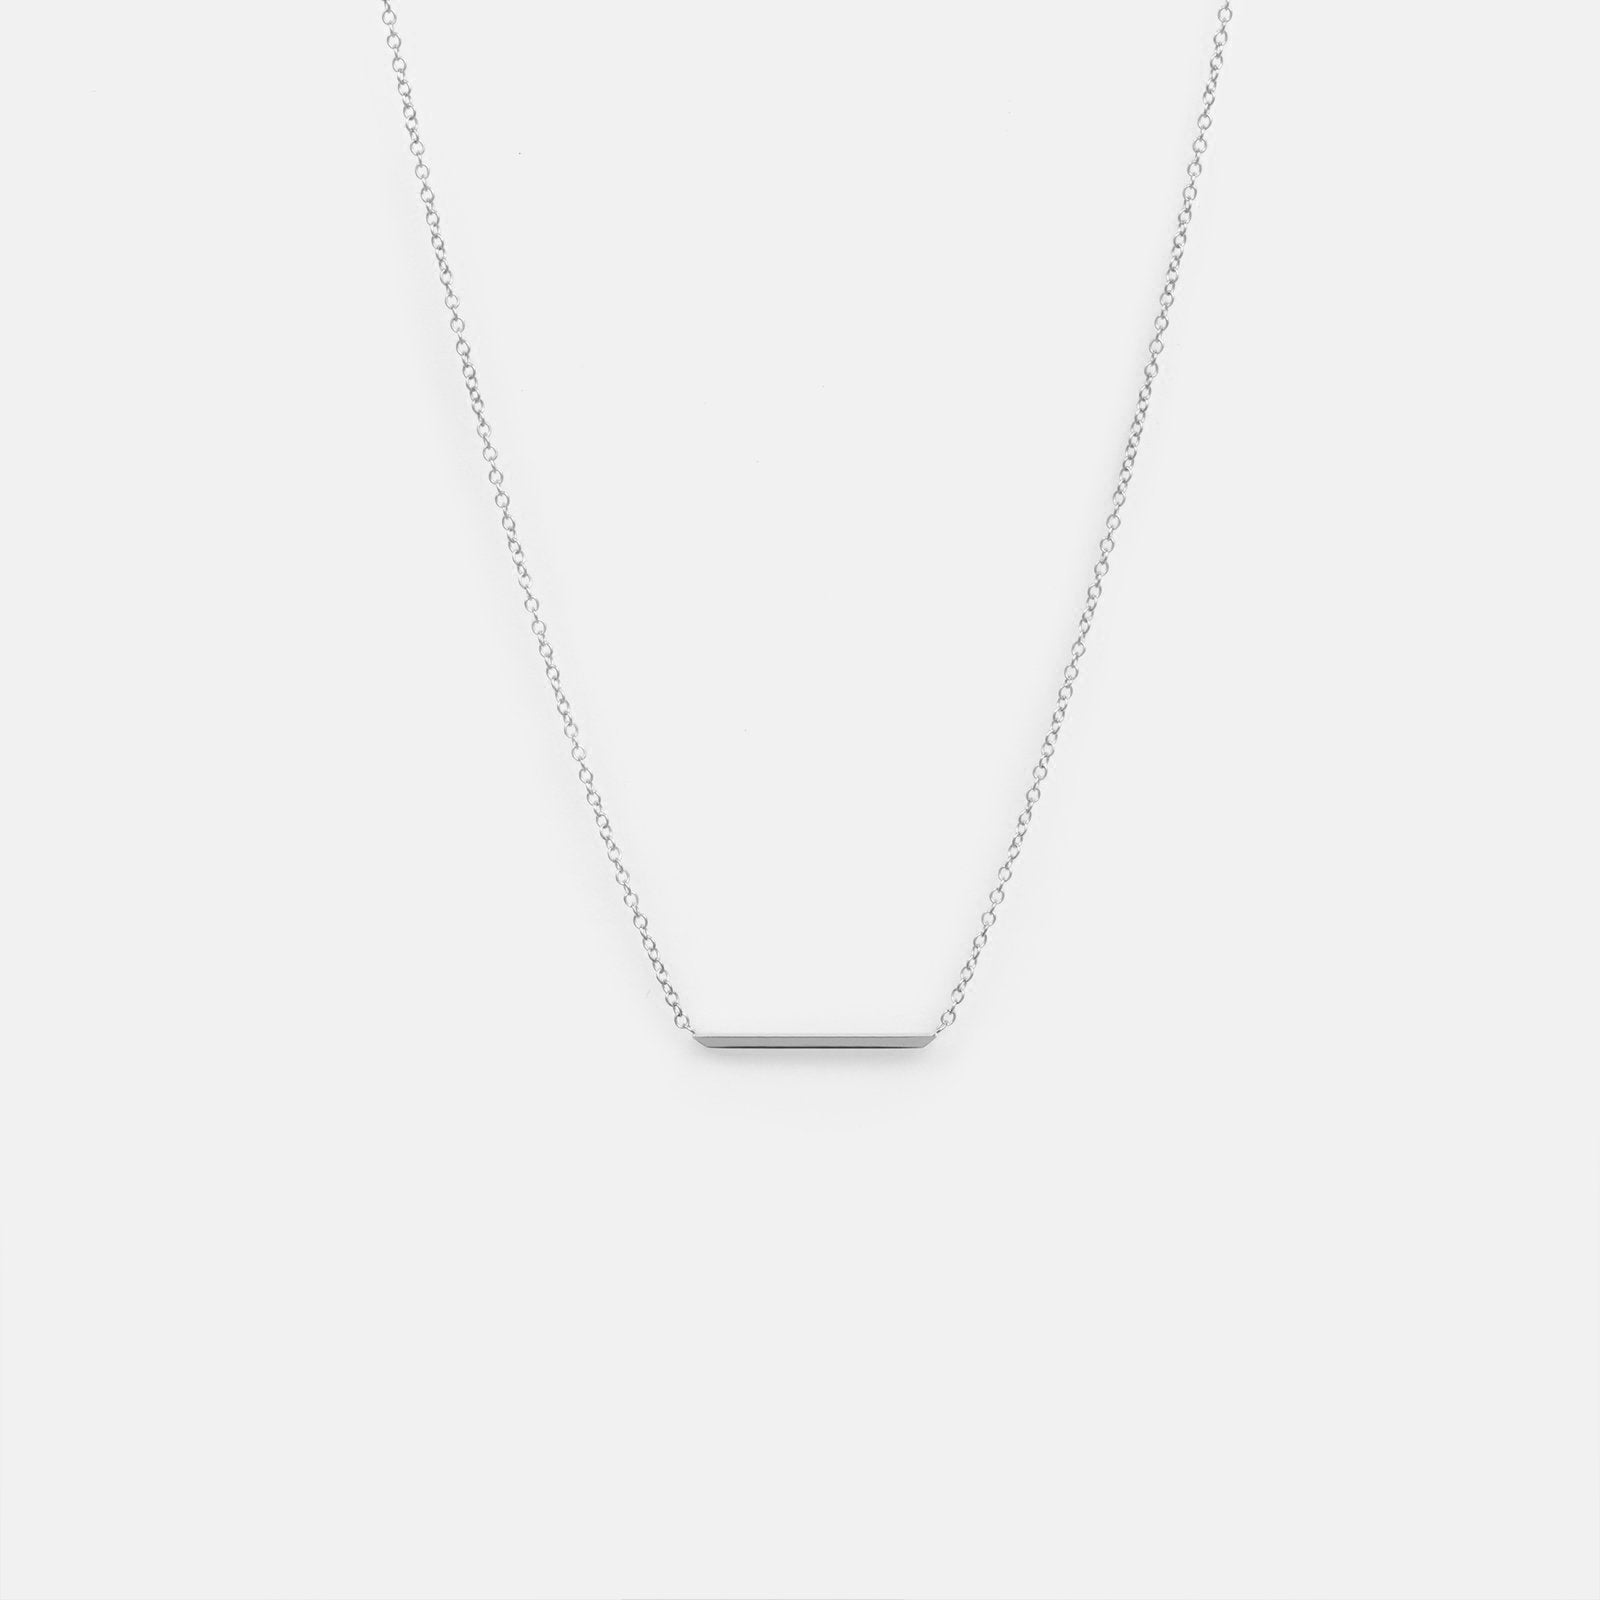 Minimalist Vati Necklace in 14k Yellow Gold by SHW Fine Jewelry Made in NYC